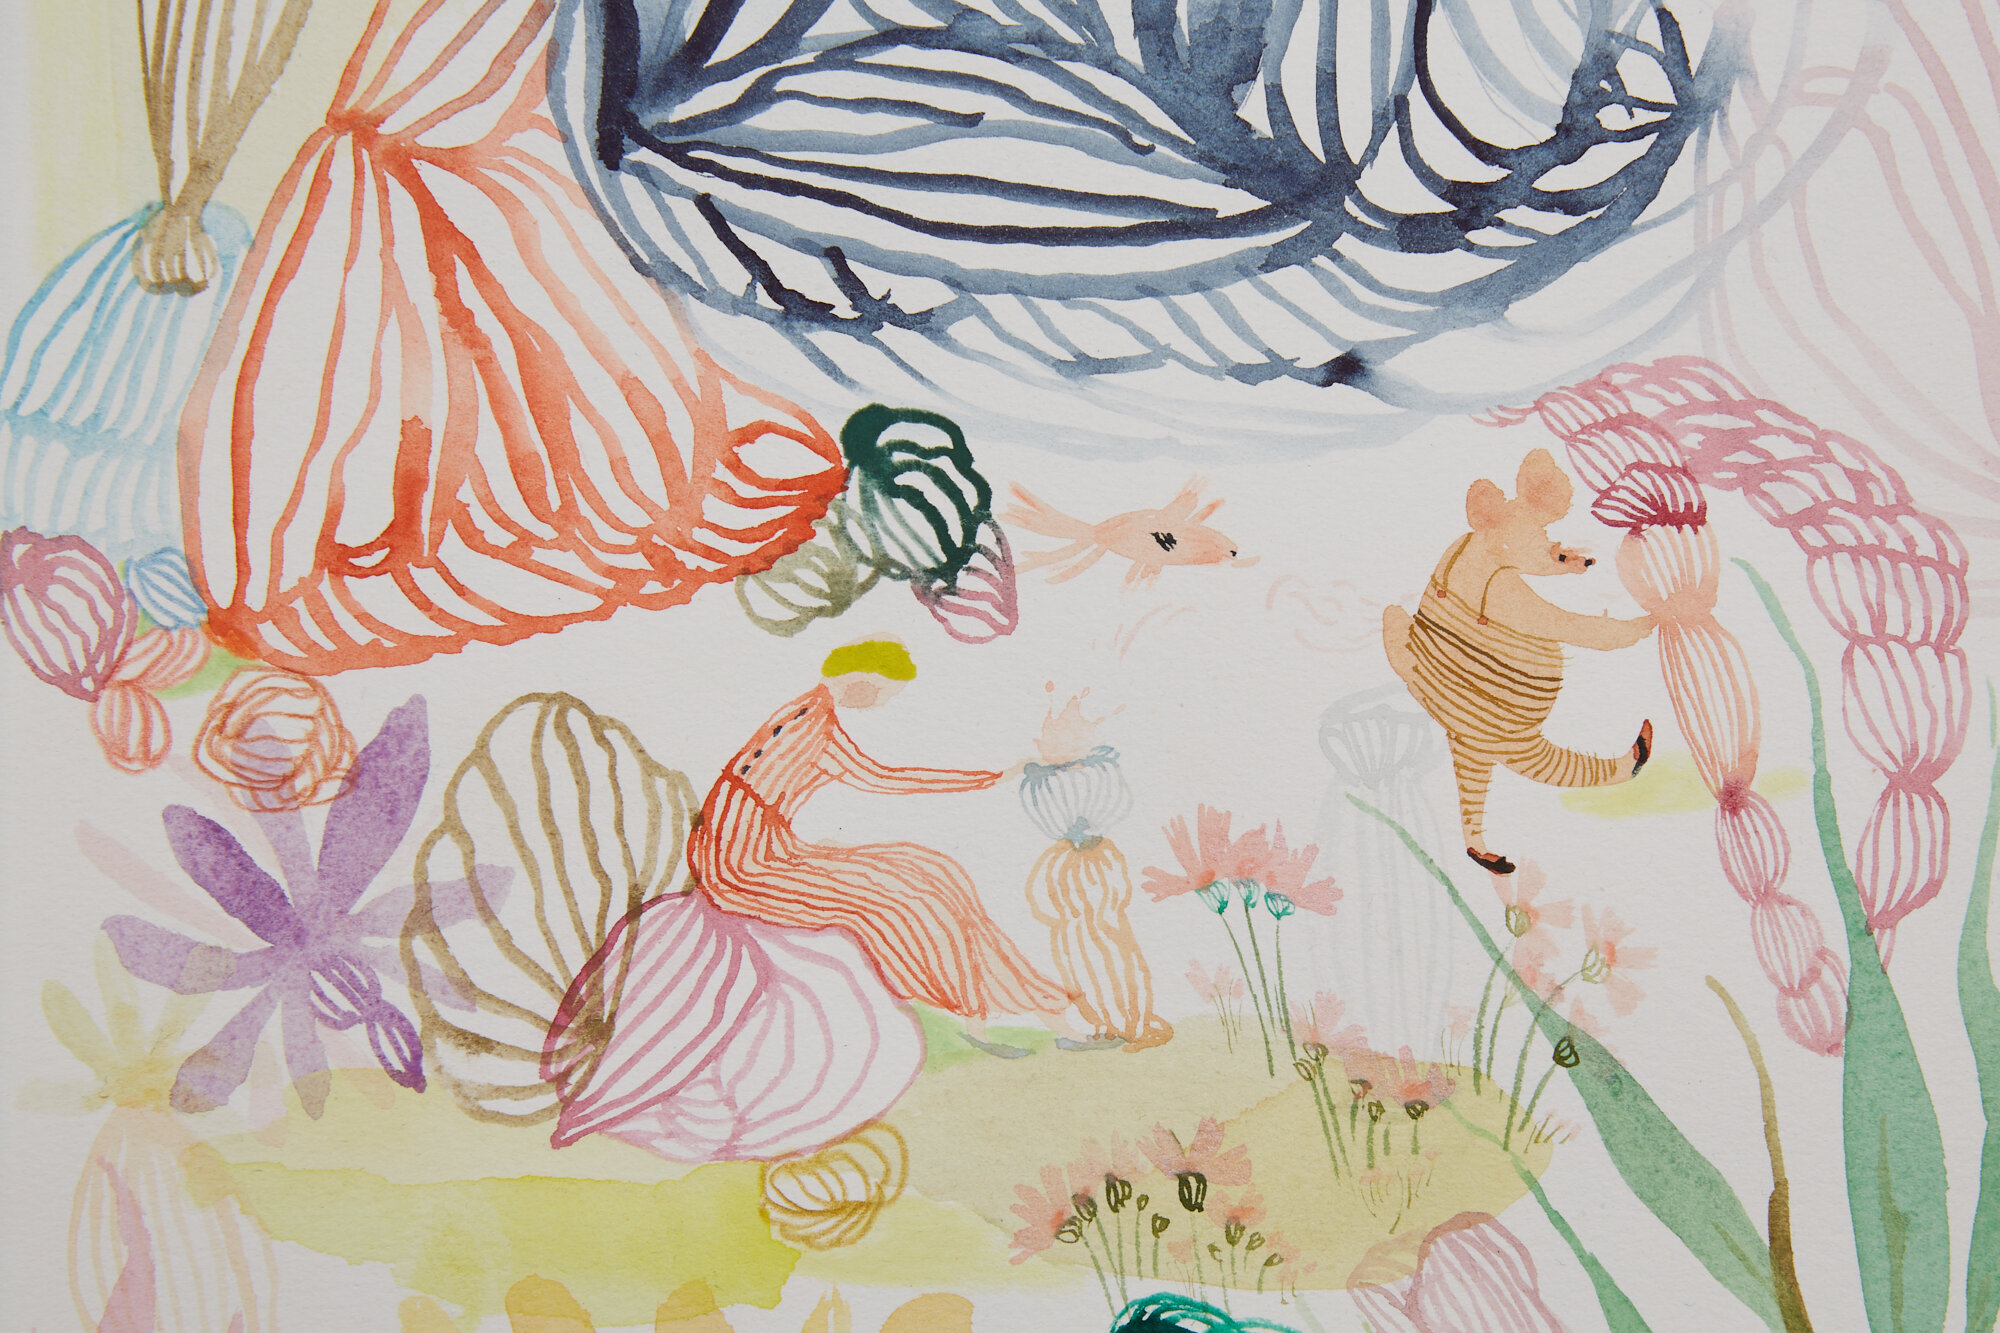  Garden In The Sea, detail  Watercolor on paper, 2020  22” x 30”  Sold 